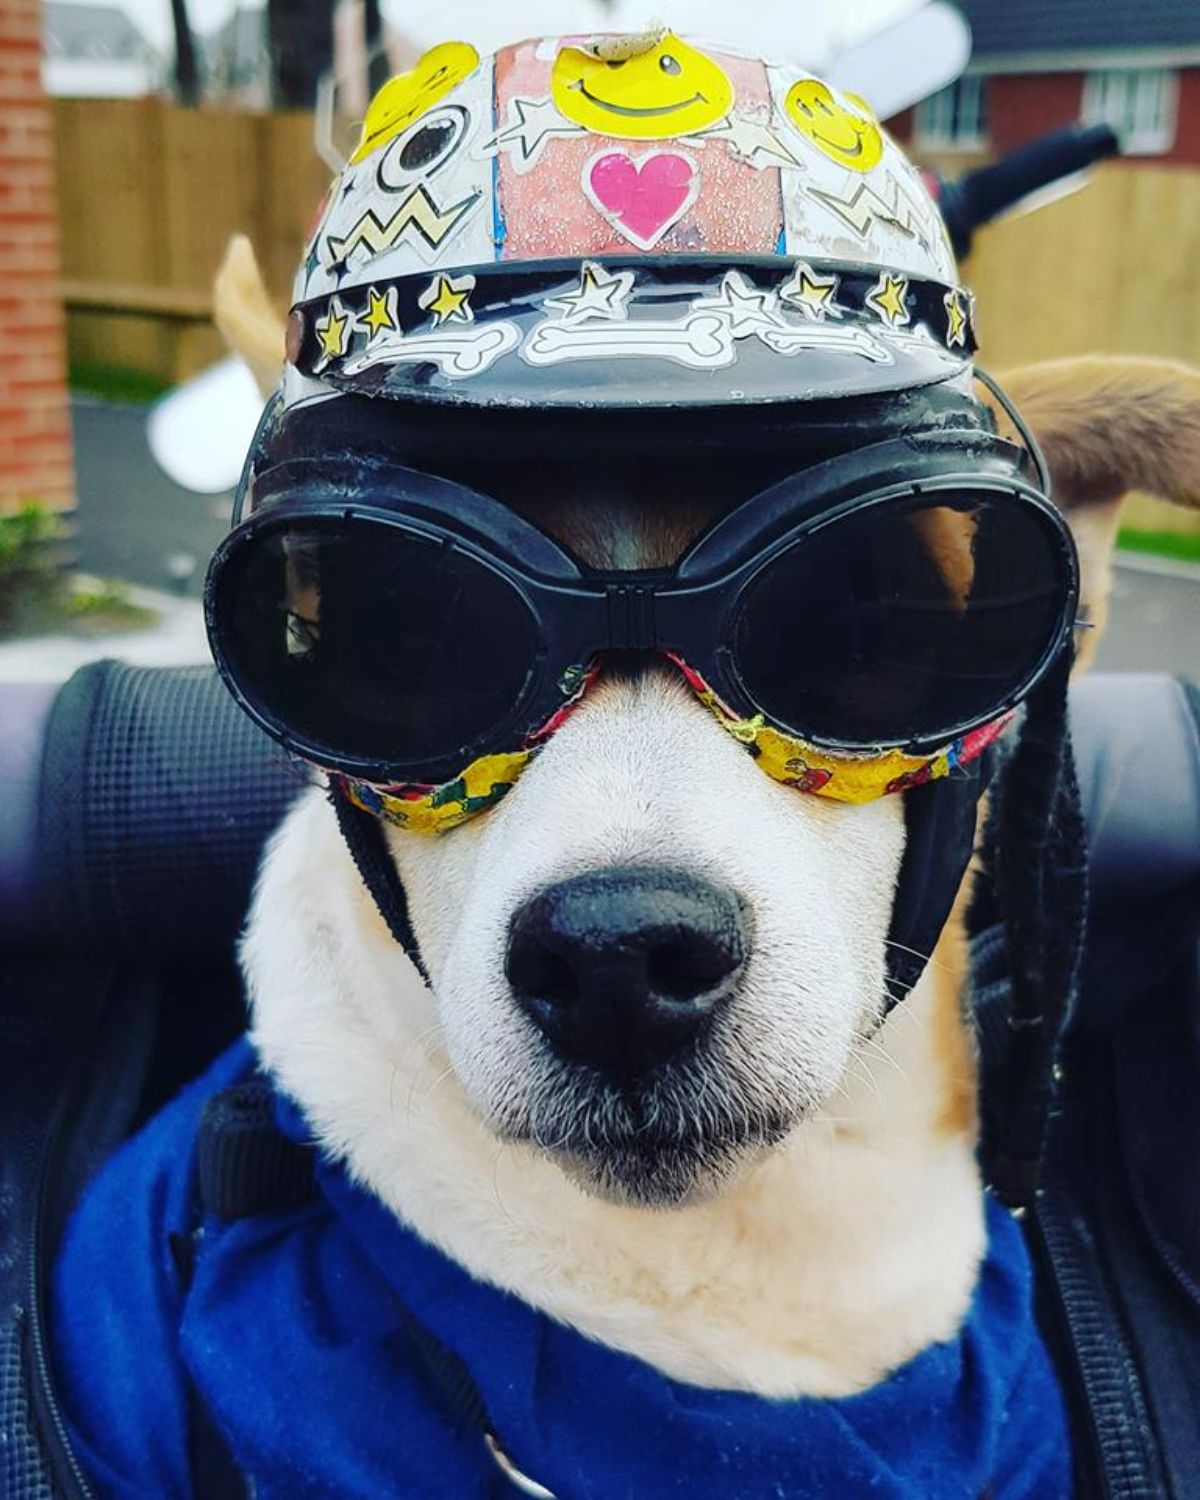 brown and white dog wearing black goggles, a colourful helmet and a blue jacket